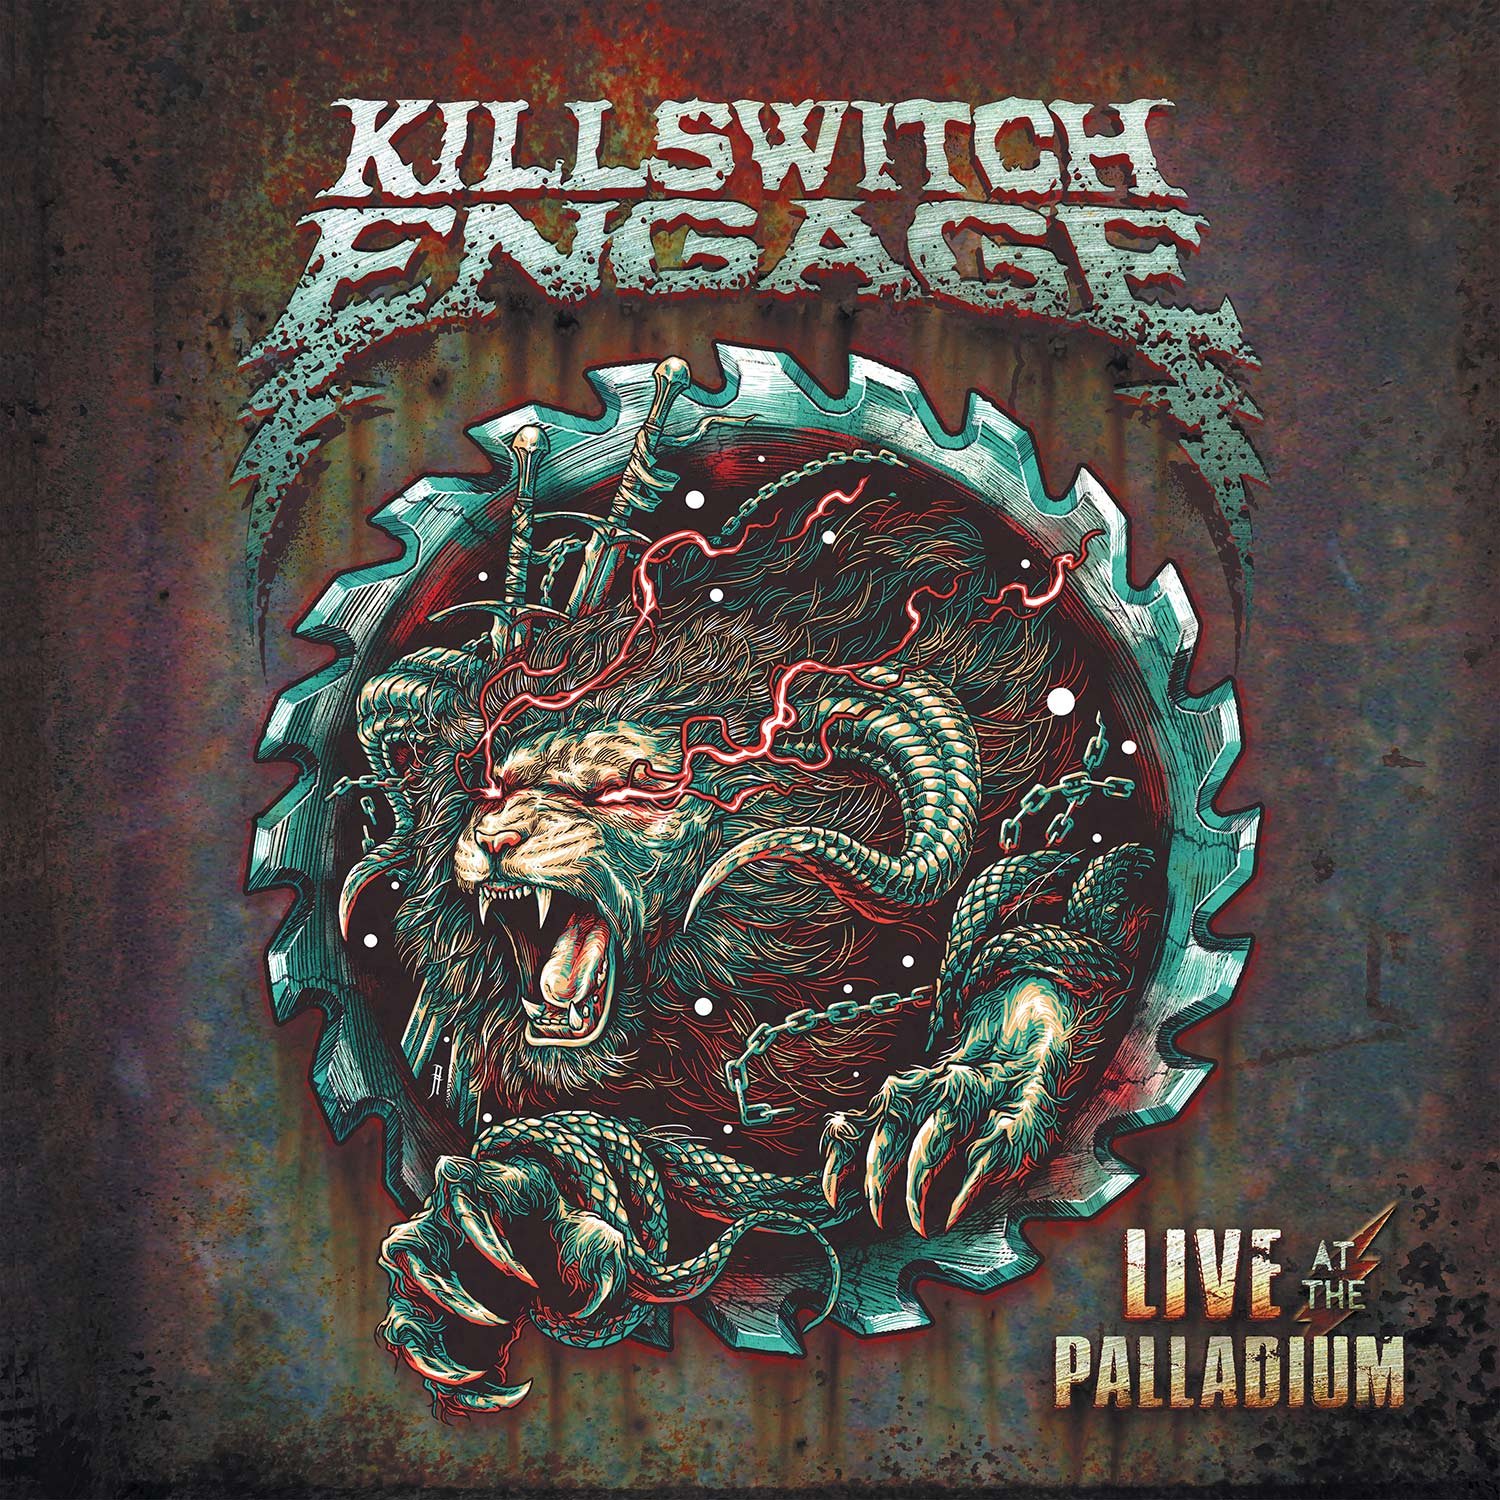 Killswitch Engage-Live At The Palladium-(3984-16008-2)-2CD-FLAC-2022-WRE Download